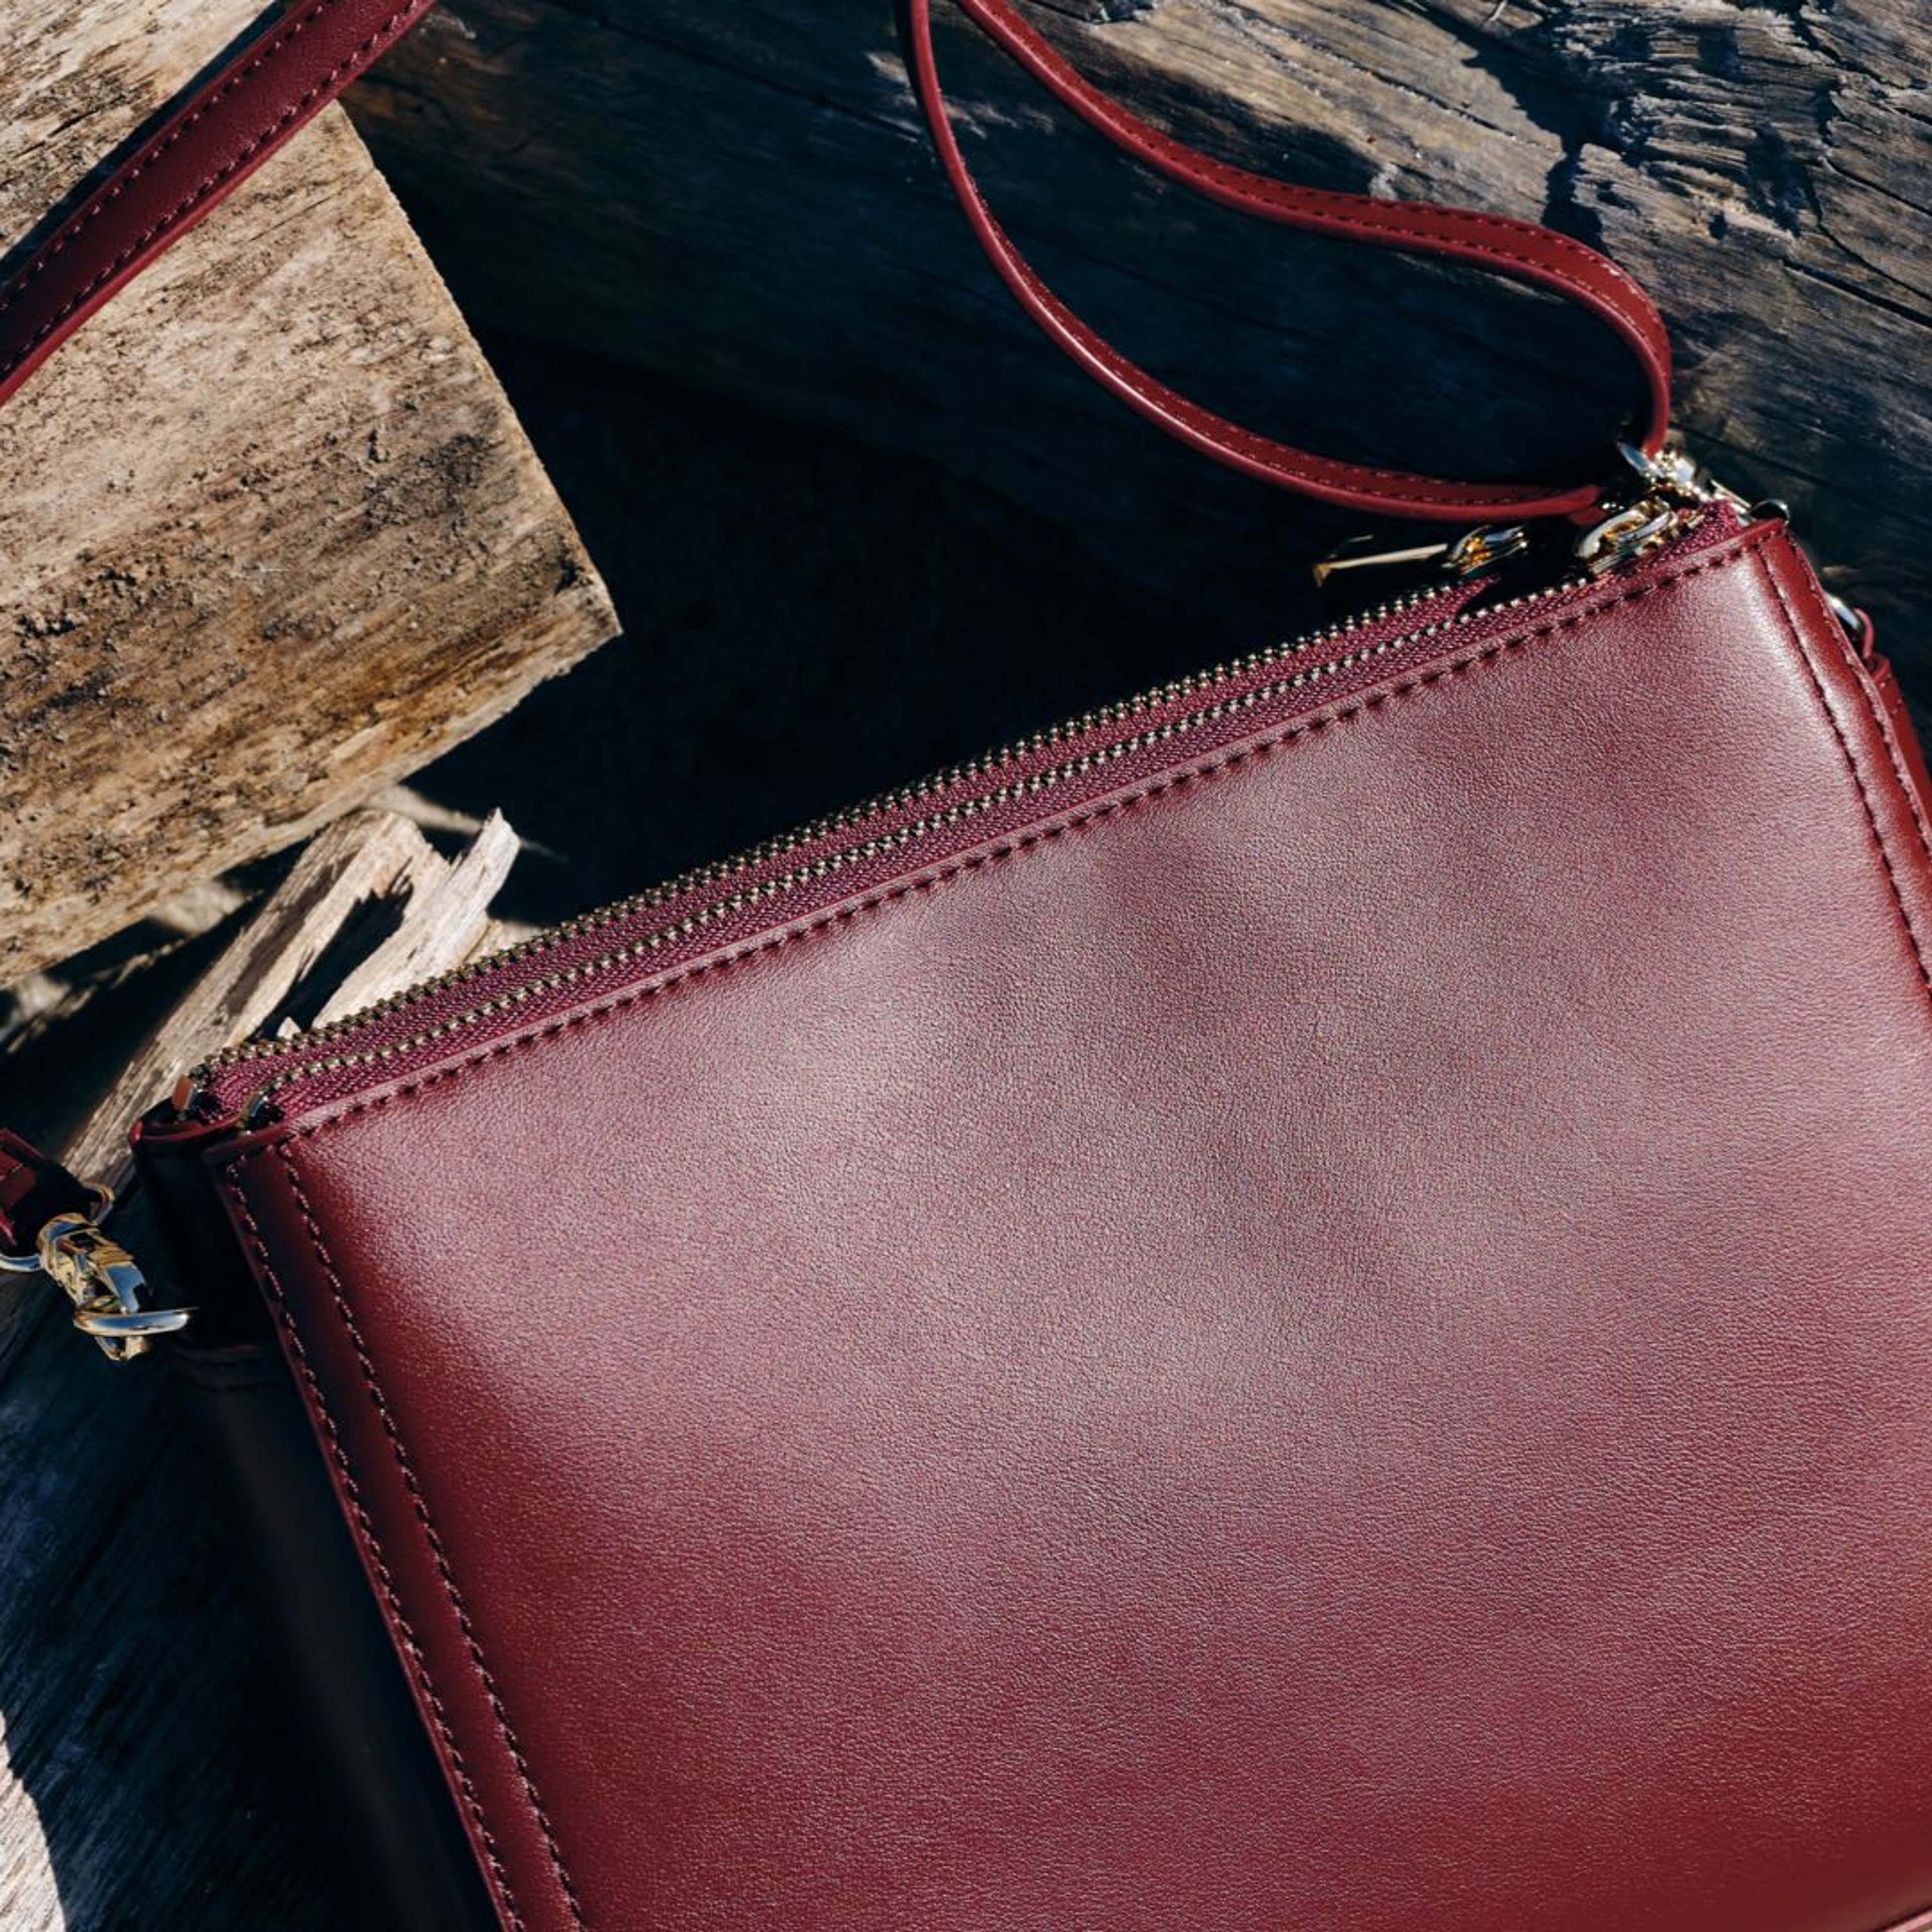 The Pearl - Cactus Leather - Burgundy / Gold / Camel